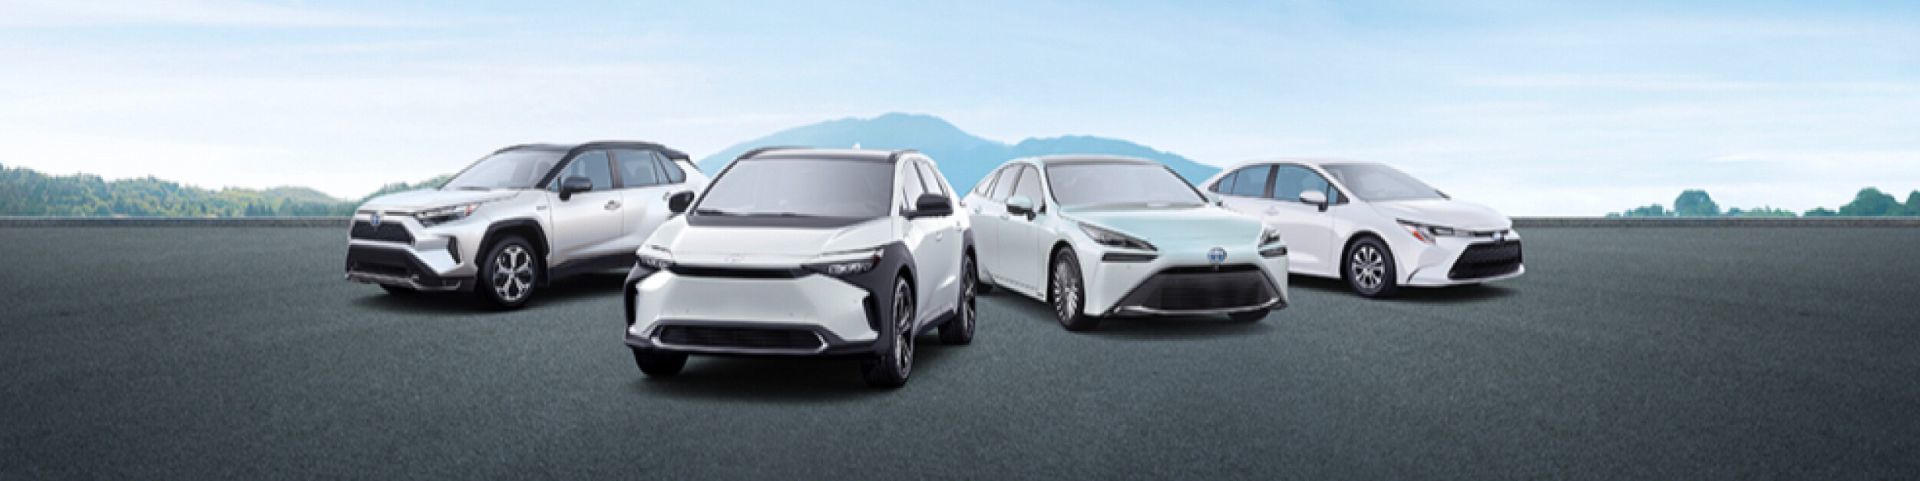 4 Types Of Toyota Electric Cars In Your City